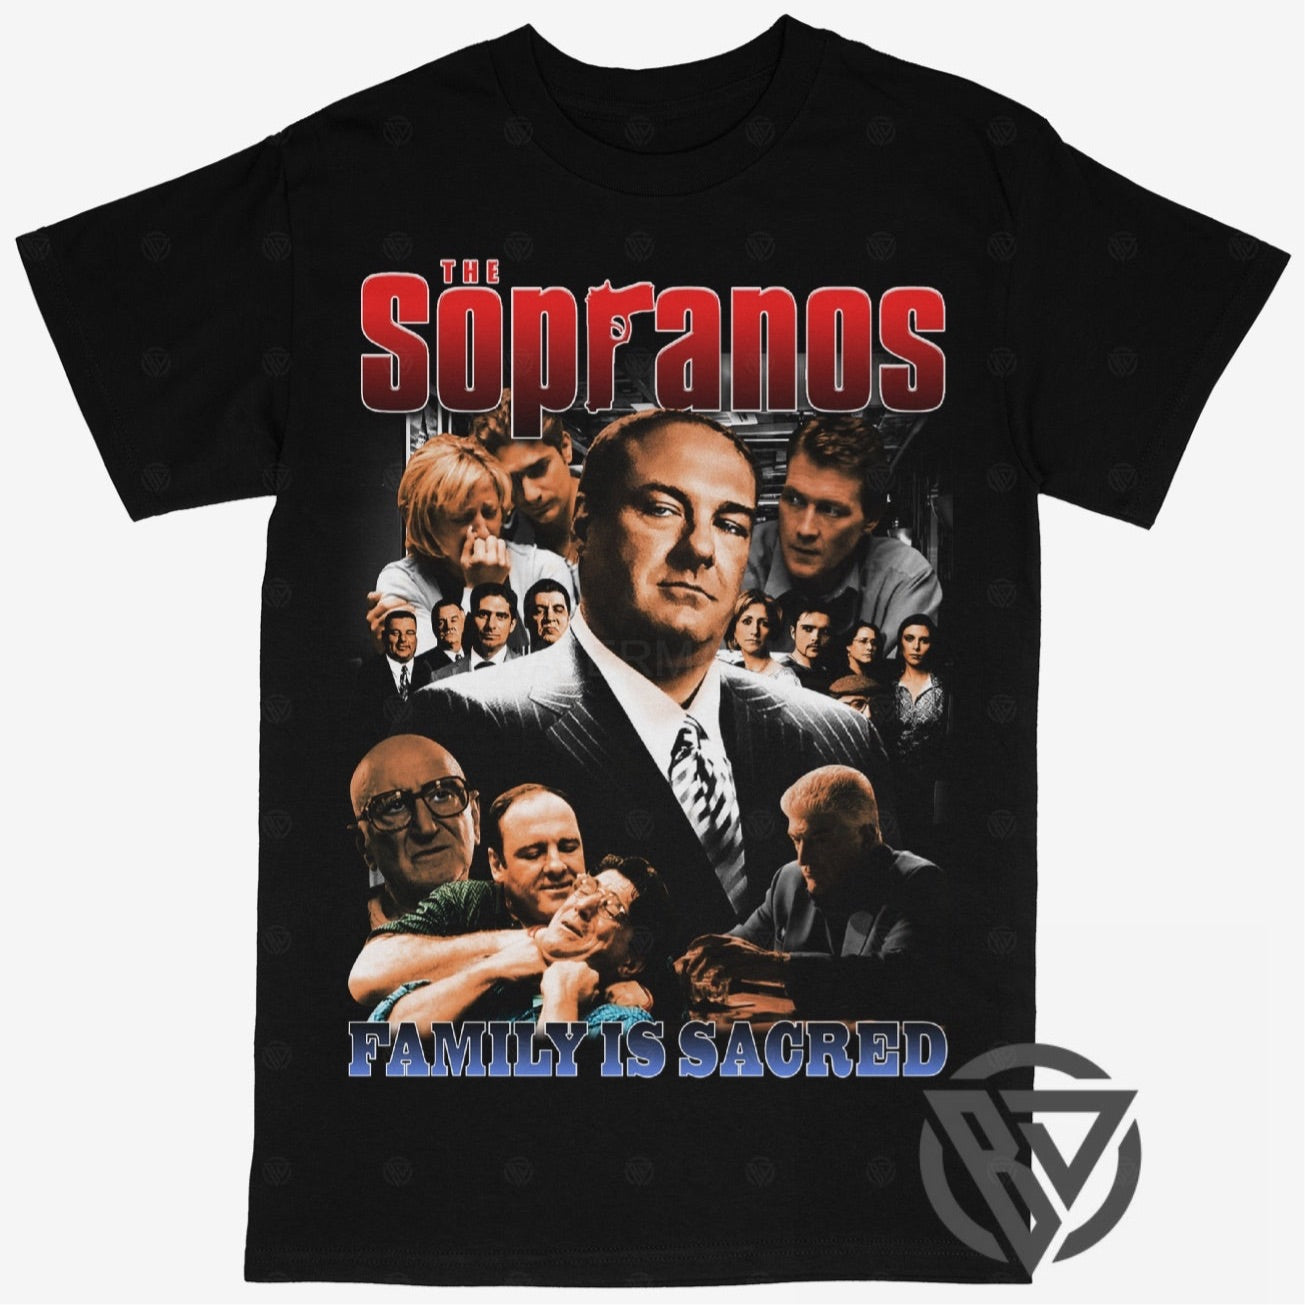 The Sopranos Tee Shirt Mafia Gangster TV Show Hiphop Rap Style